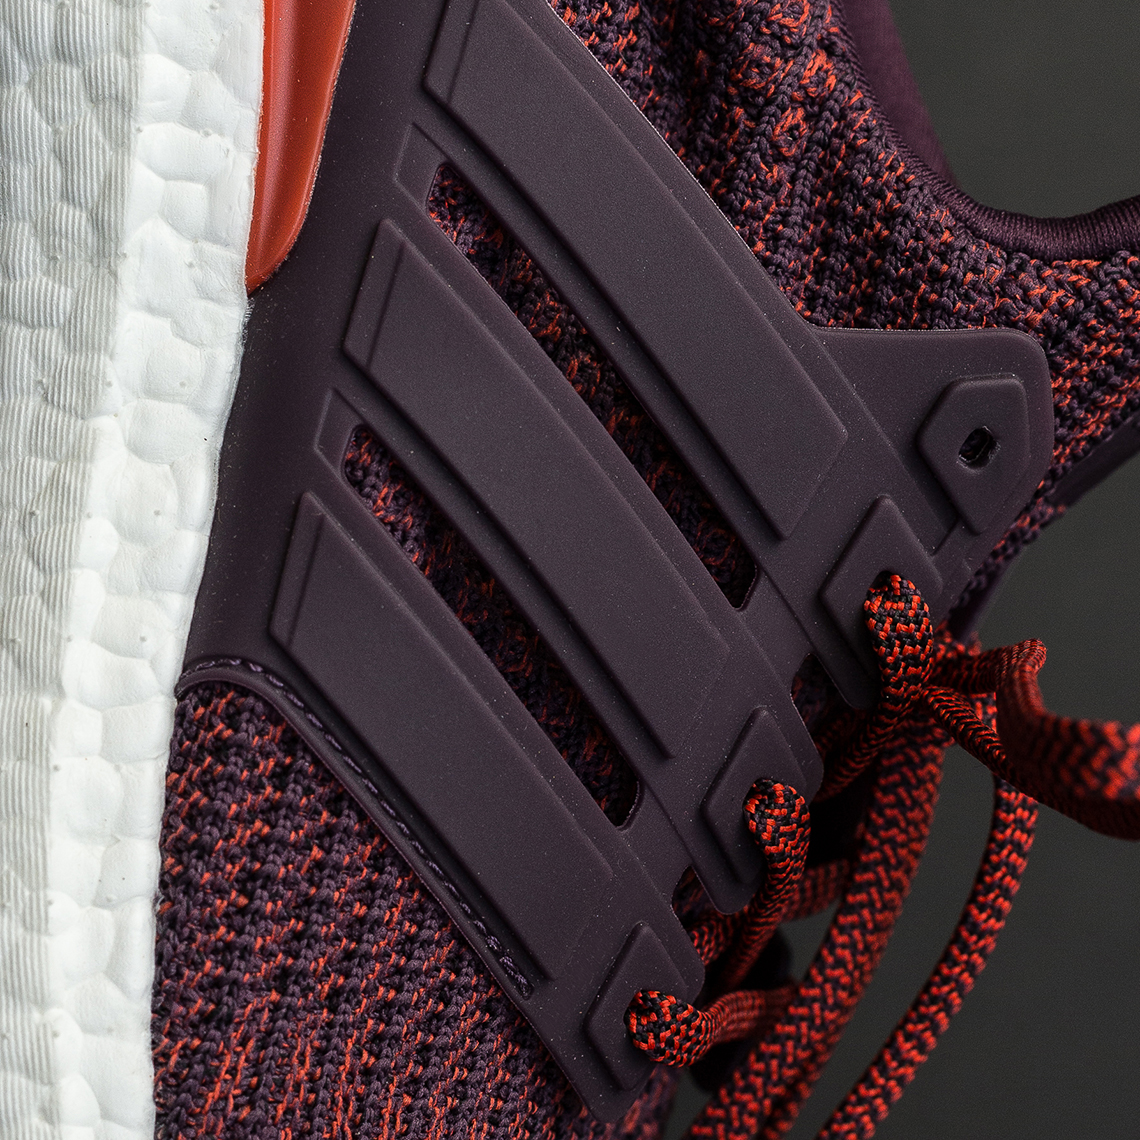 Adidas Ultra Boost 4 Maroon Available Now 8